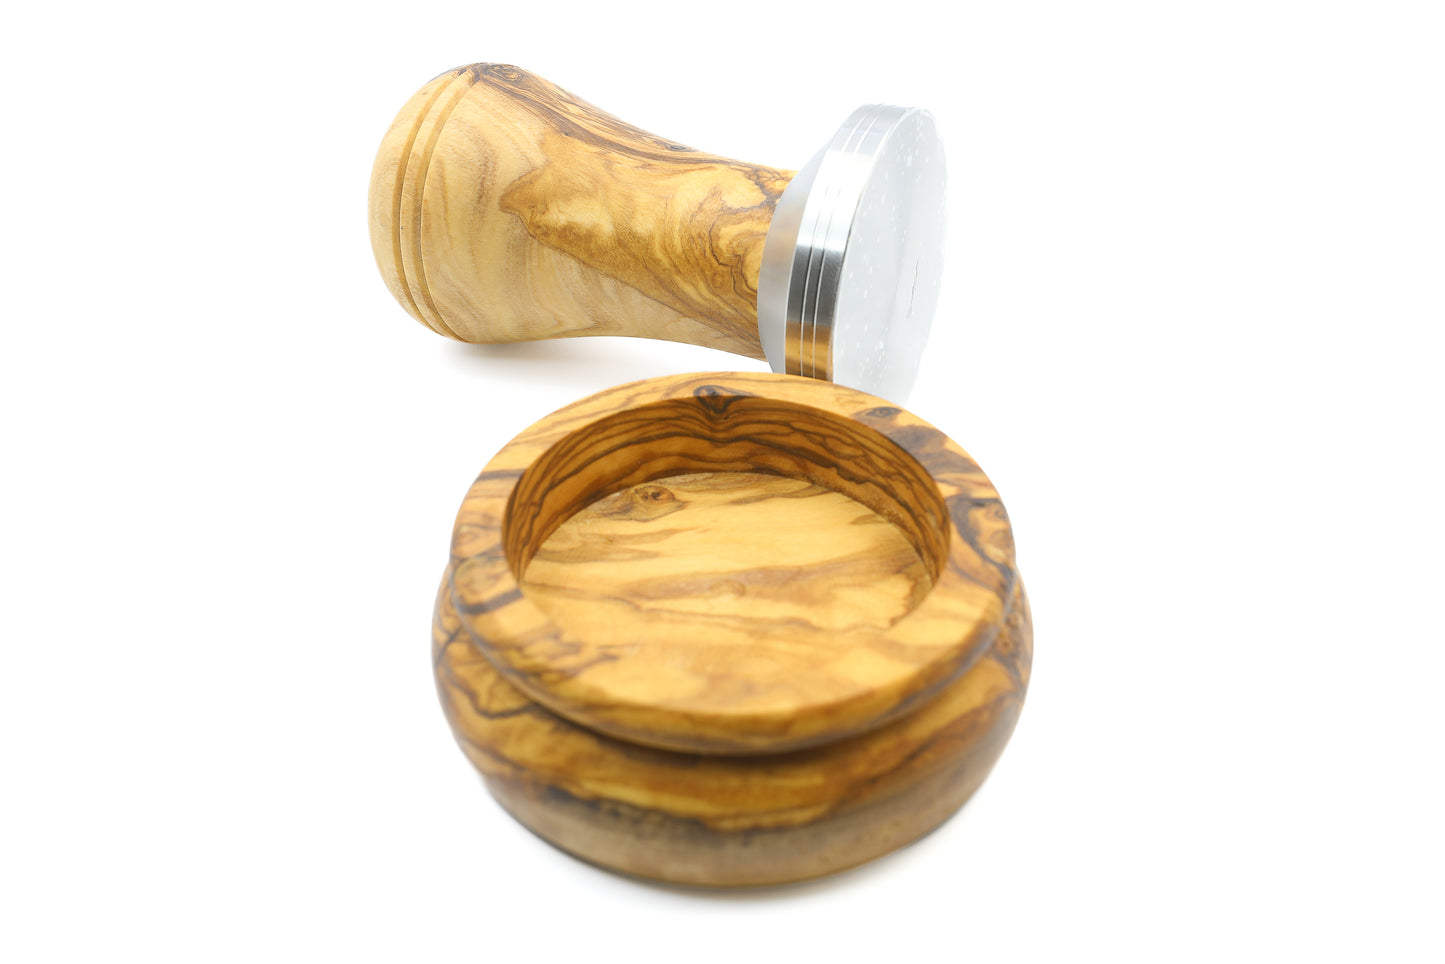 Artisan-crafted tamper for coffee enthusiasts, featuring olive wood and stainless steel